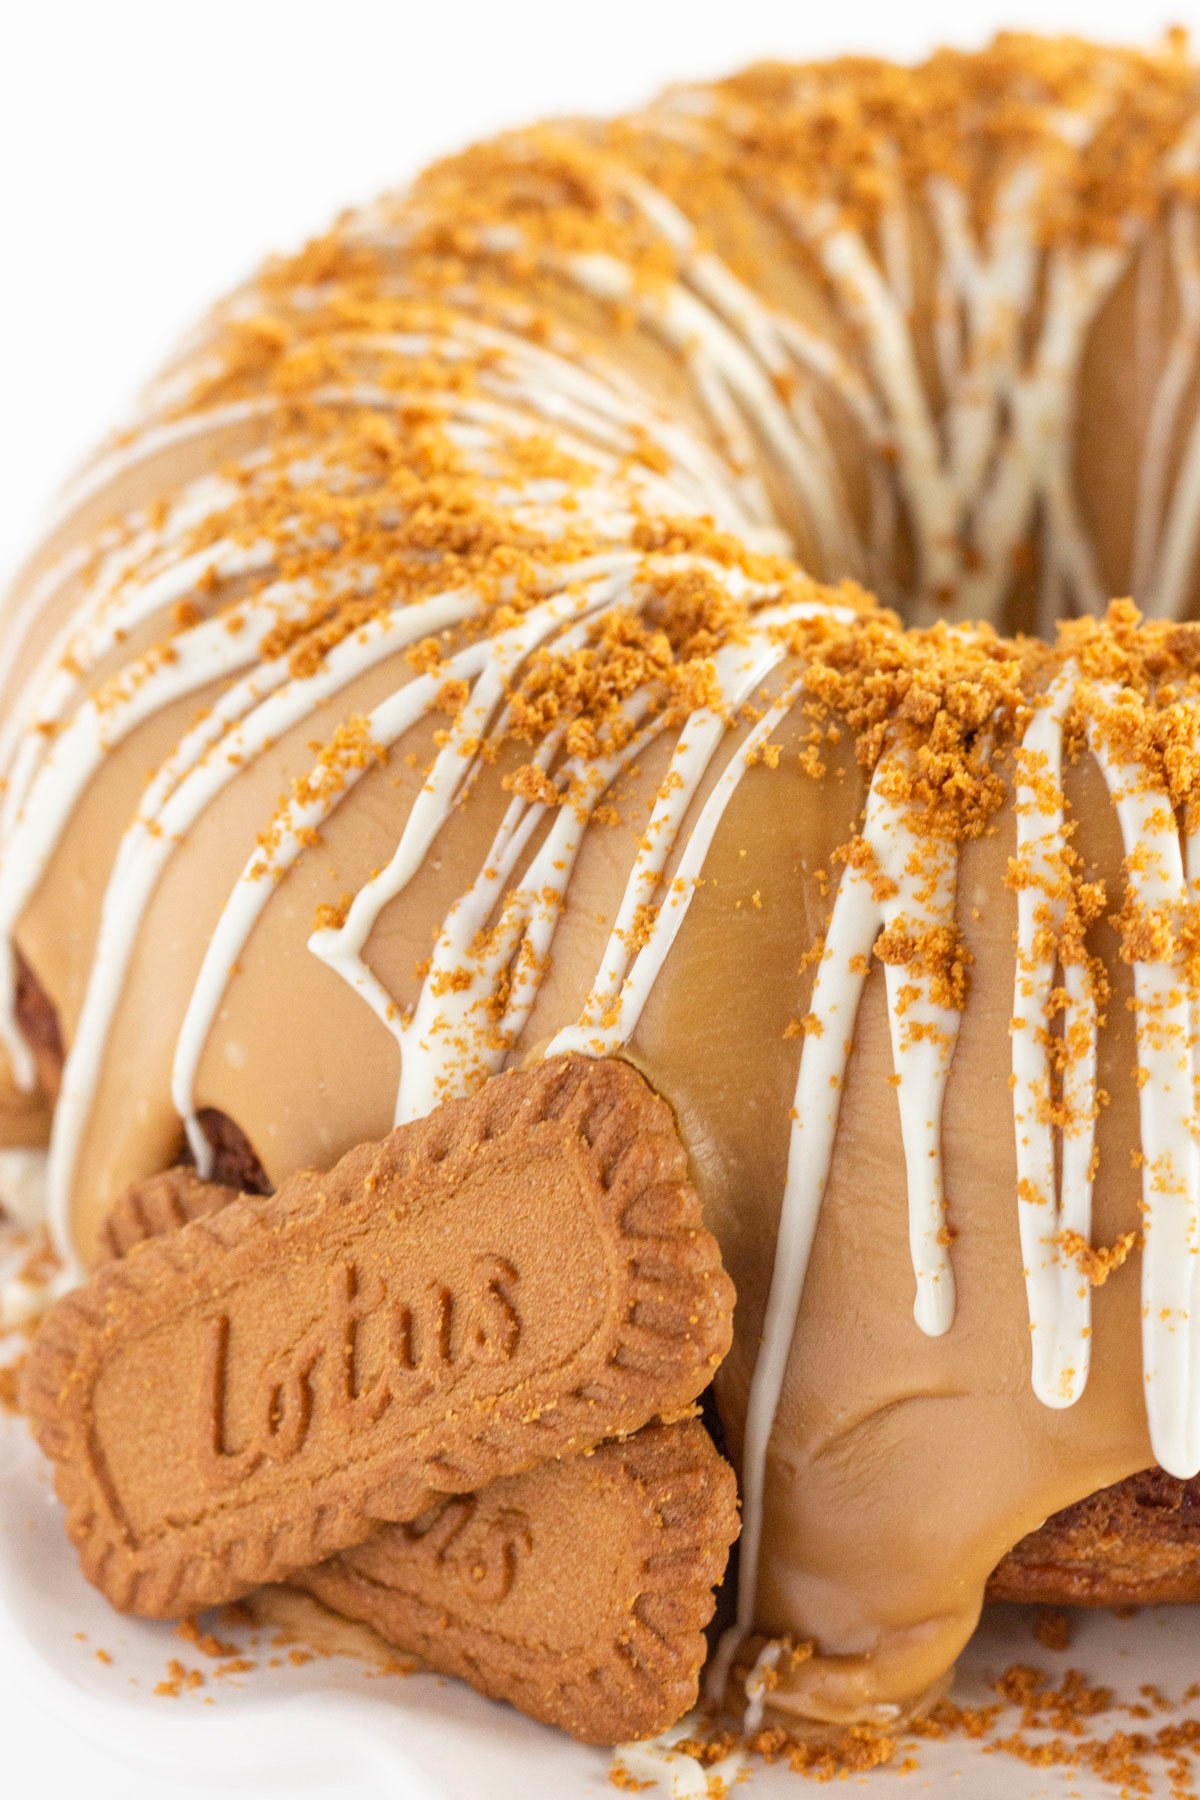 A whole cookie butter bundt cake with frosting, a drizzle of white chocolate and cookie crumbs.